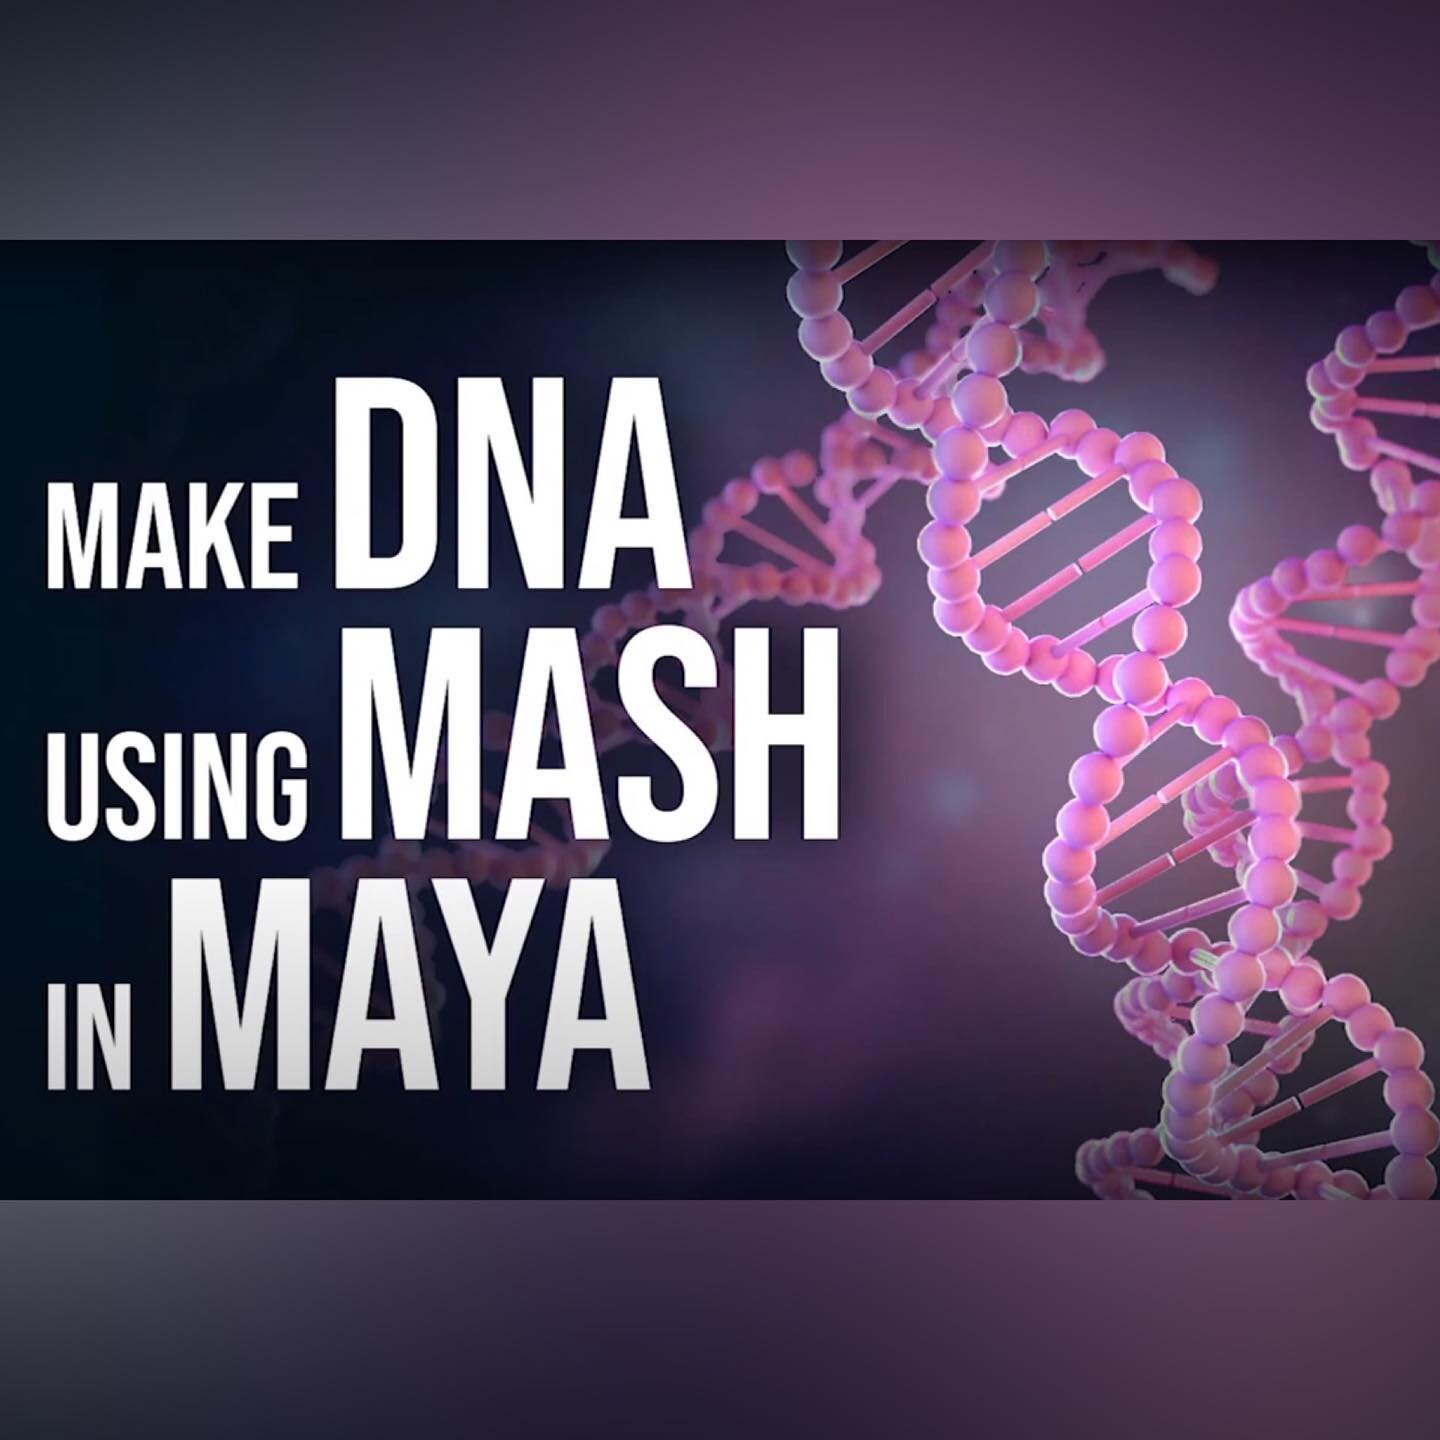 Been a long long time since my last tutorial on YouTube... but here it is! 🧬 Creating DNA using MASH in Maya! 

Head over to my YouTube: YouTube.com/emilymcdougallart to check it out 👀 

⠀⠀⠀⠀⠀⠀ ⠀⠀⠀⠀⠀⠀⠀⠀⠀⠀⠀⠀ ⠀⠀⠀⠀⠀⠀⠀⠀⠀⠀⠀⠀ ⠀⠀ ⠀⠀⠀⠀⠀⠀⠀⠀⠀⠀⠀ ⠀⠀⠀⠀⠀⠀⠀⠀⠀⠀⠀ ⠀